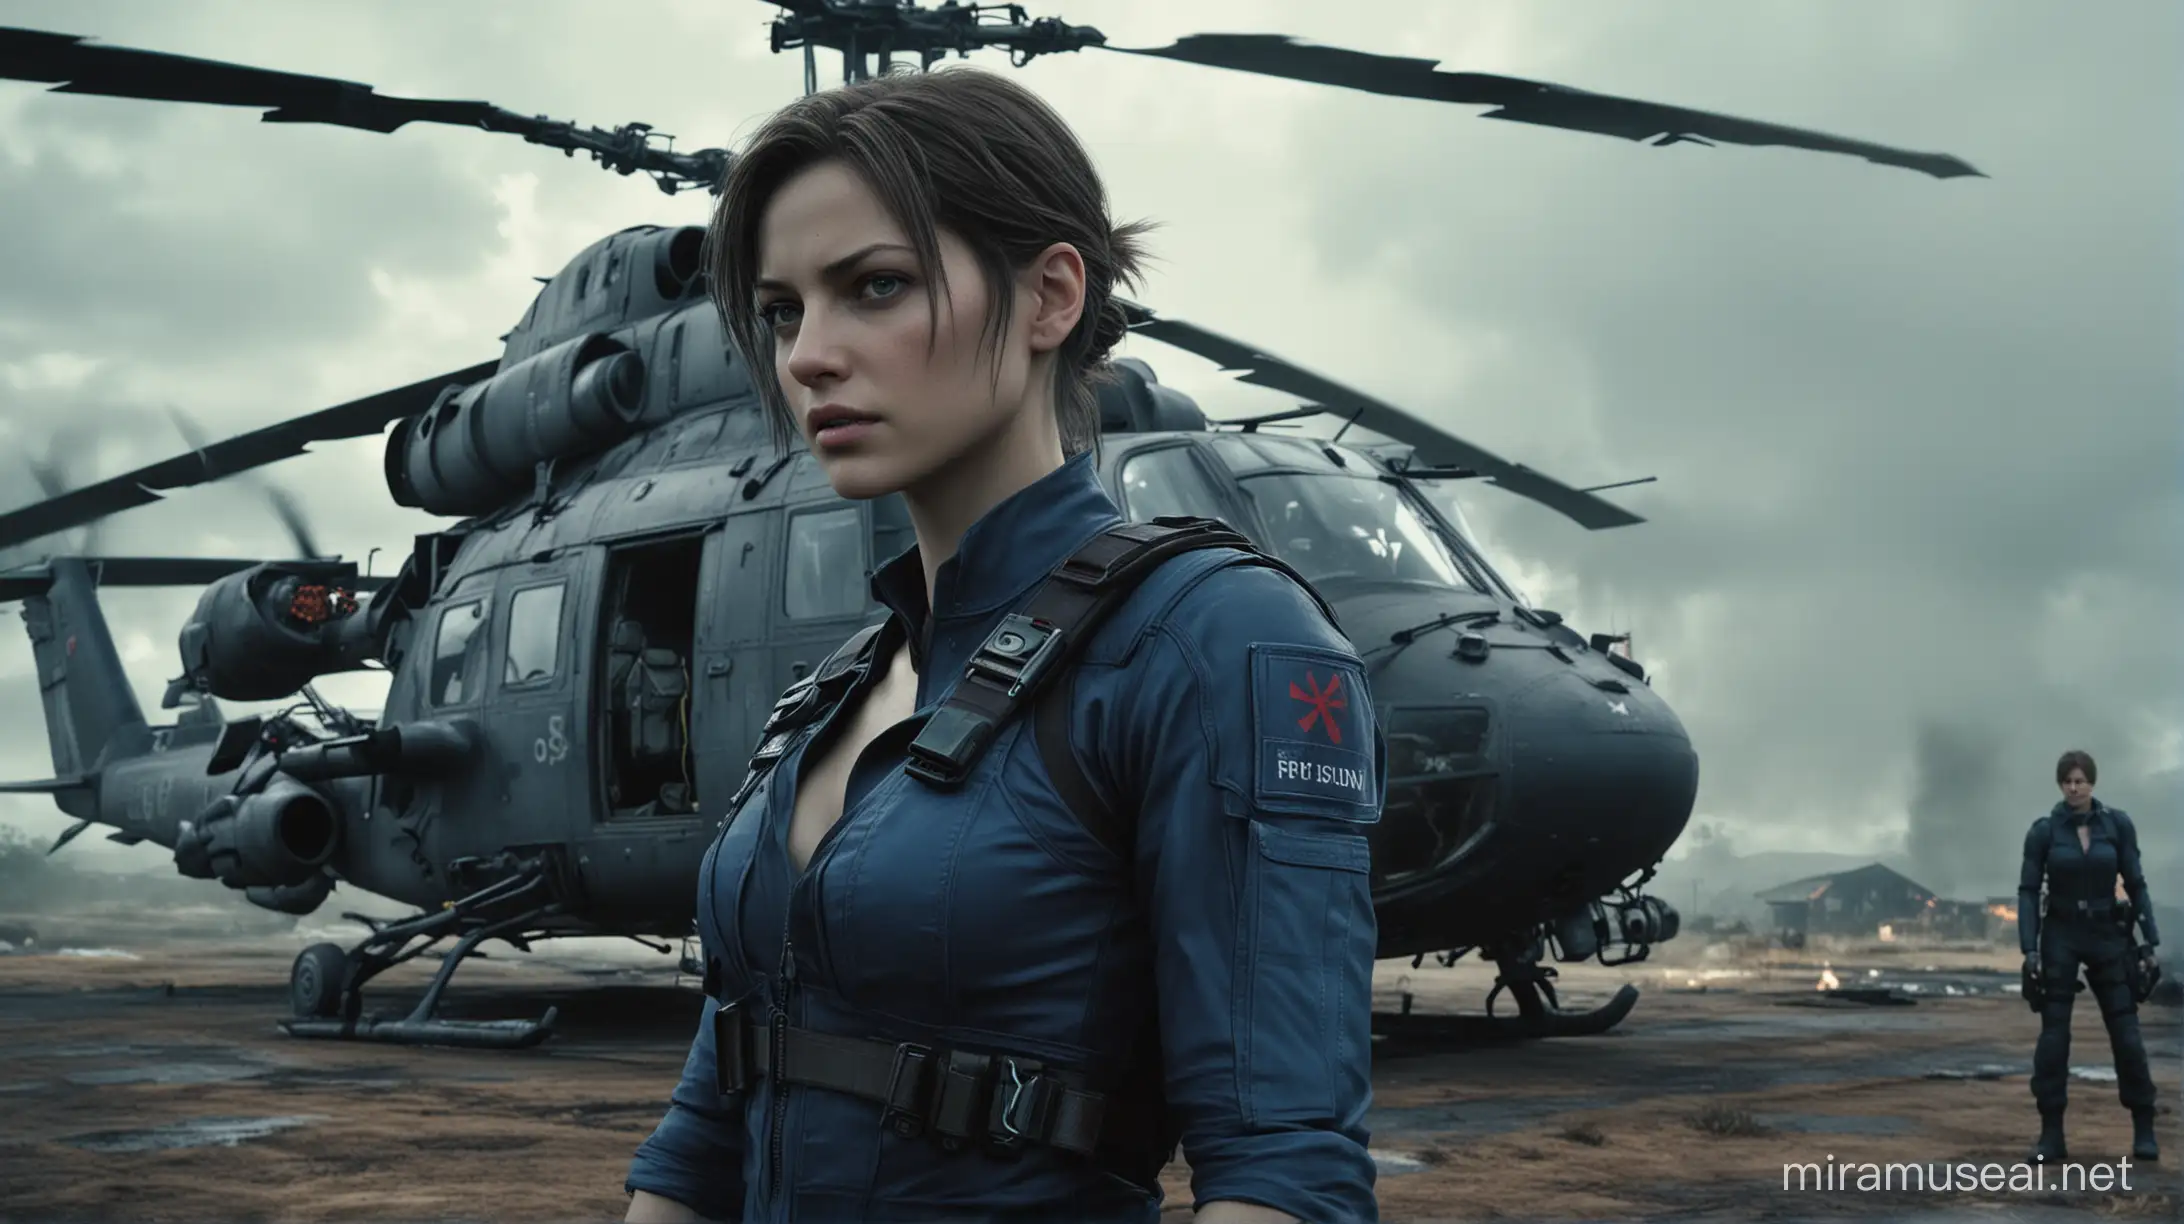 cinematic still, resident evil, jill valentine, apocalyptic, leaning against helecopter

